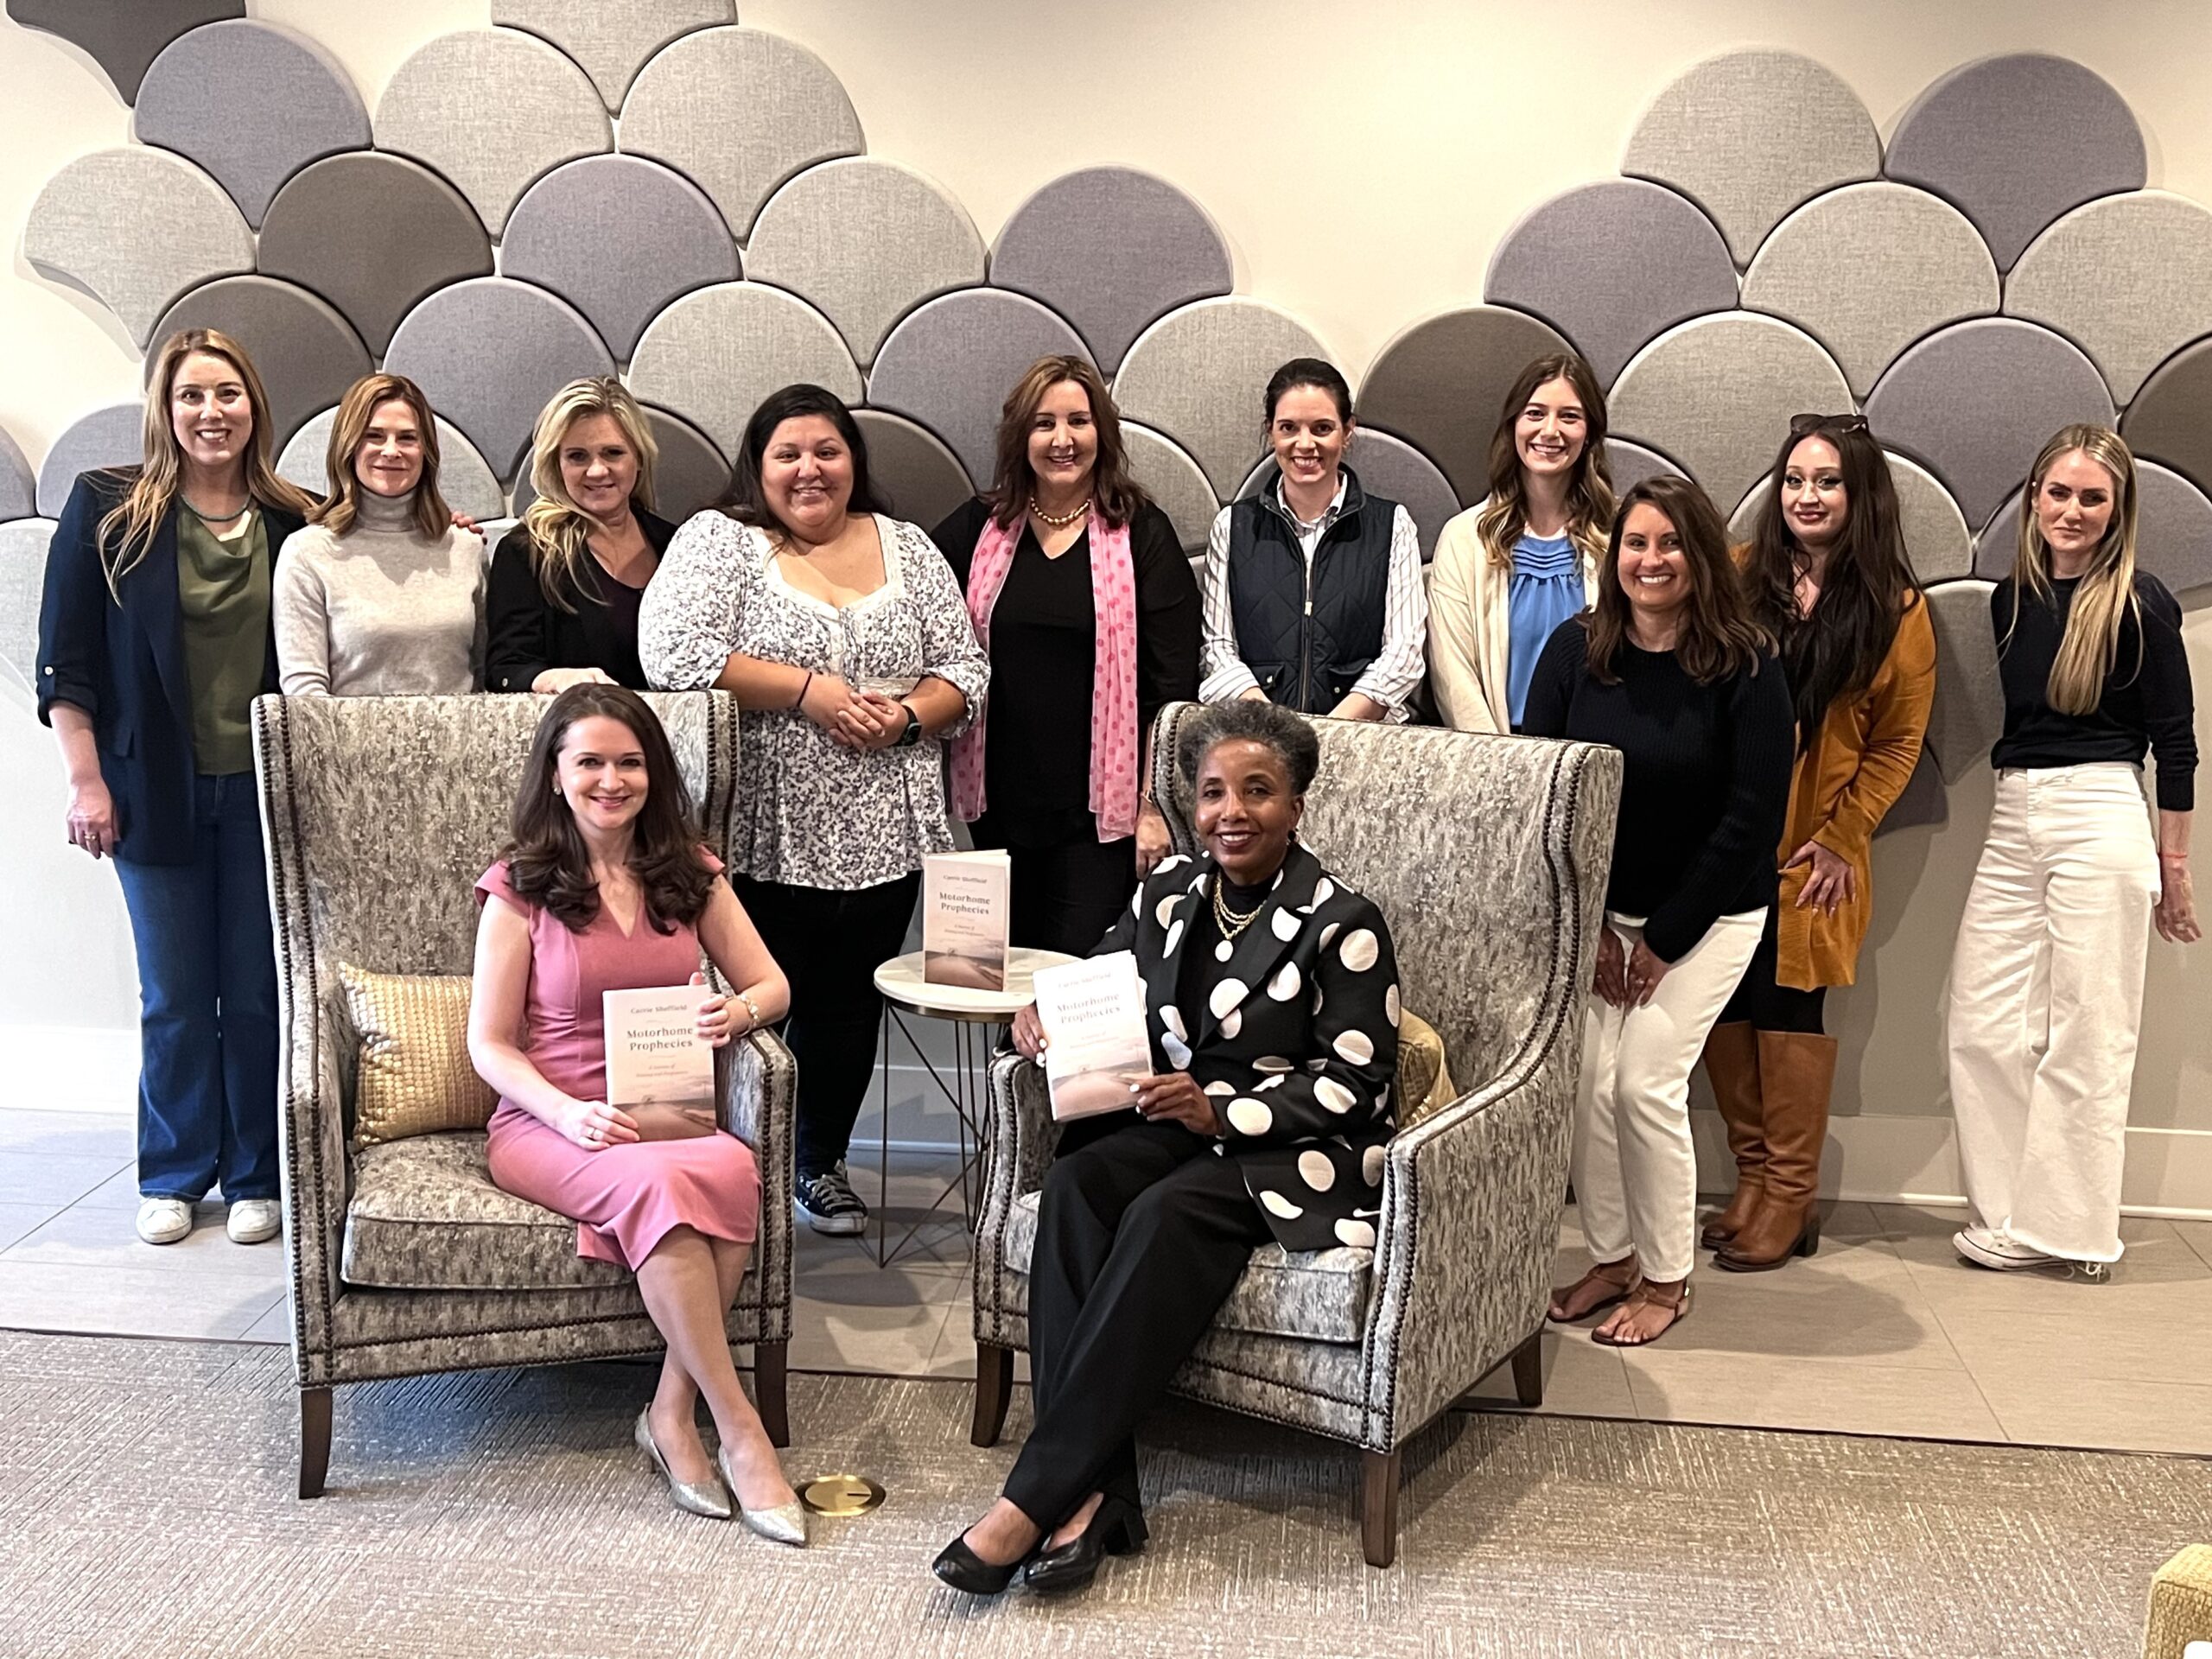 The Nashville Chapter of Independent Women’s Network Hosts Carrie Sheffield for the Launch of Her Memoir, Motorhome Prophecies